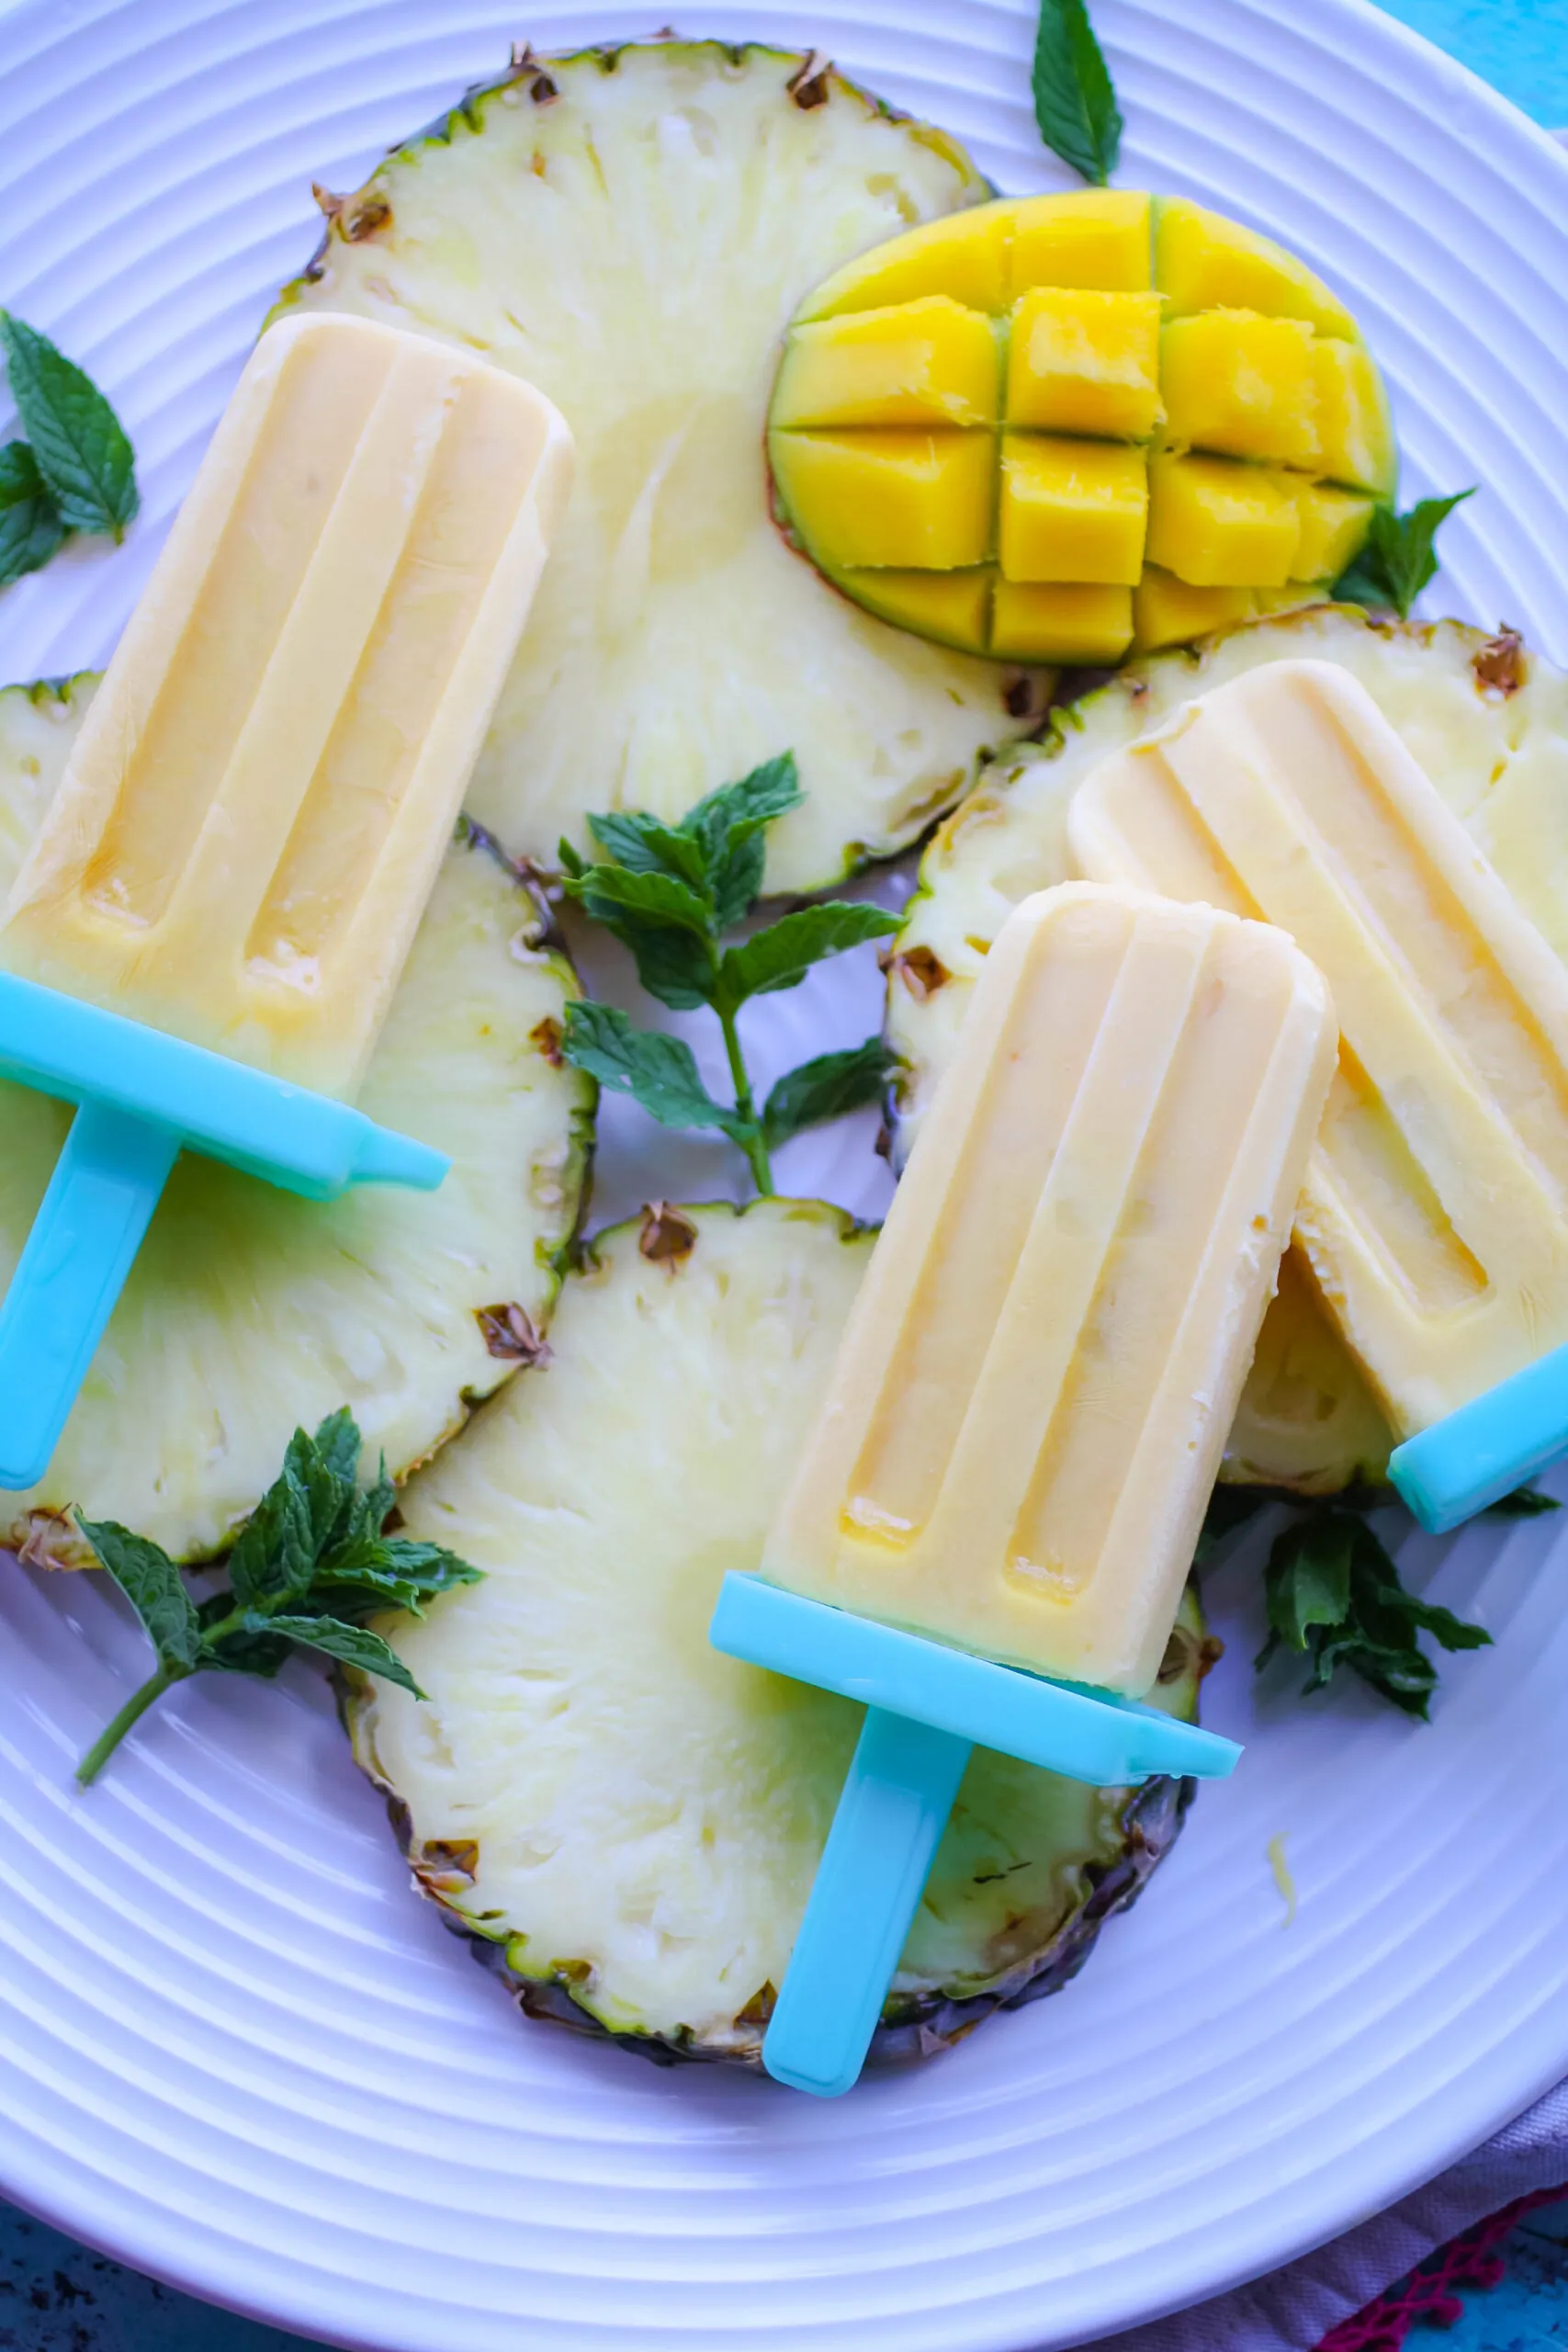 Mango-Pineapple Creamsicles are ideal as a treat to beat the heat!